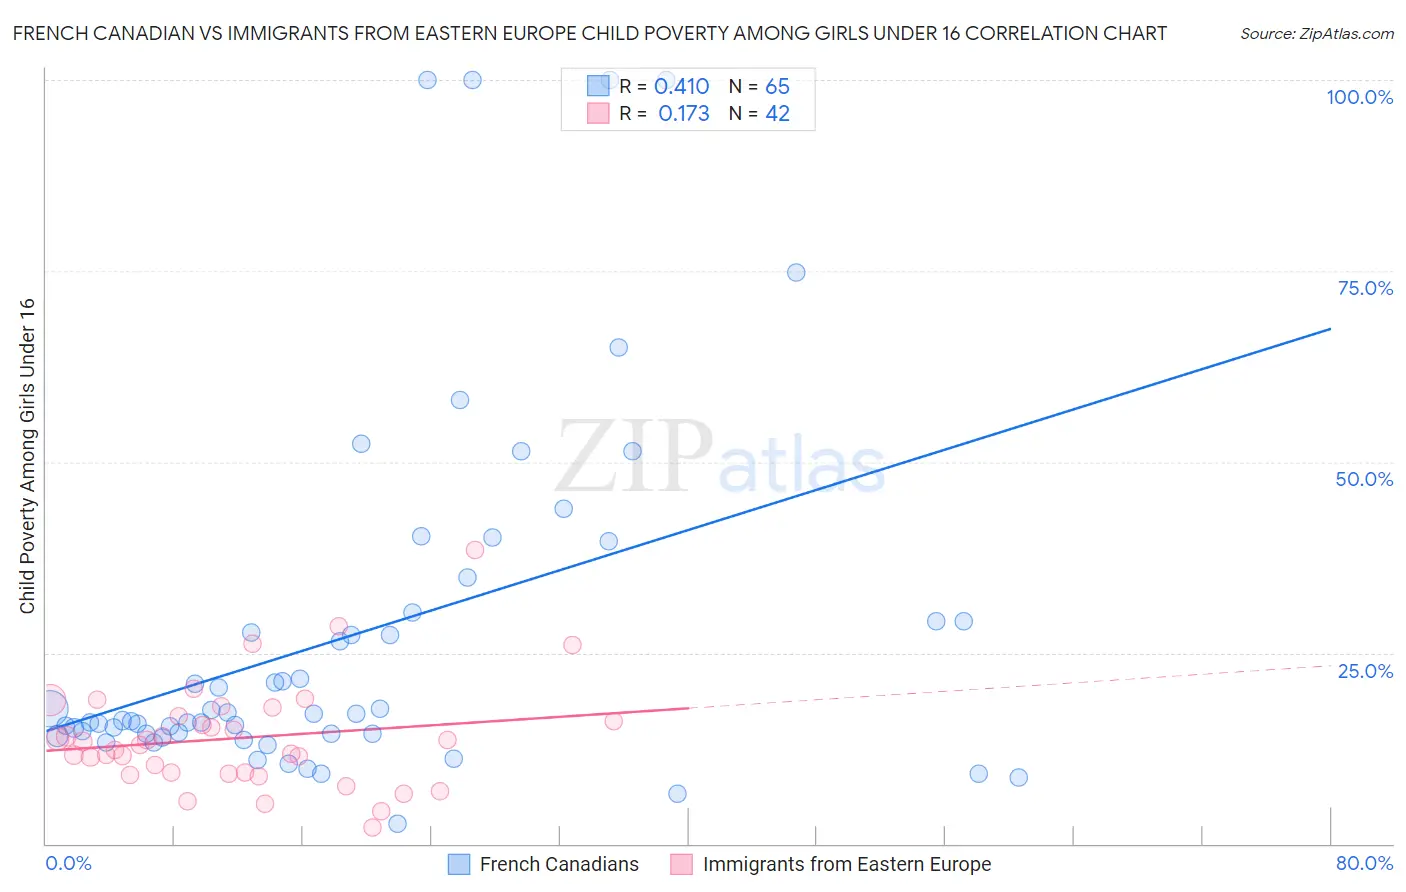 French Canadian vs Immigrants from Eastern Europe Child Poverty Among Girls Under 16